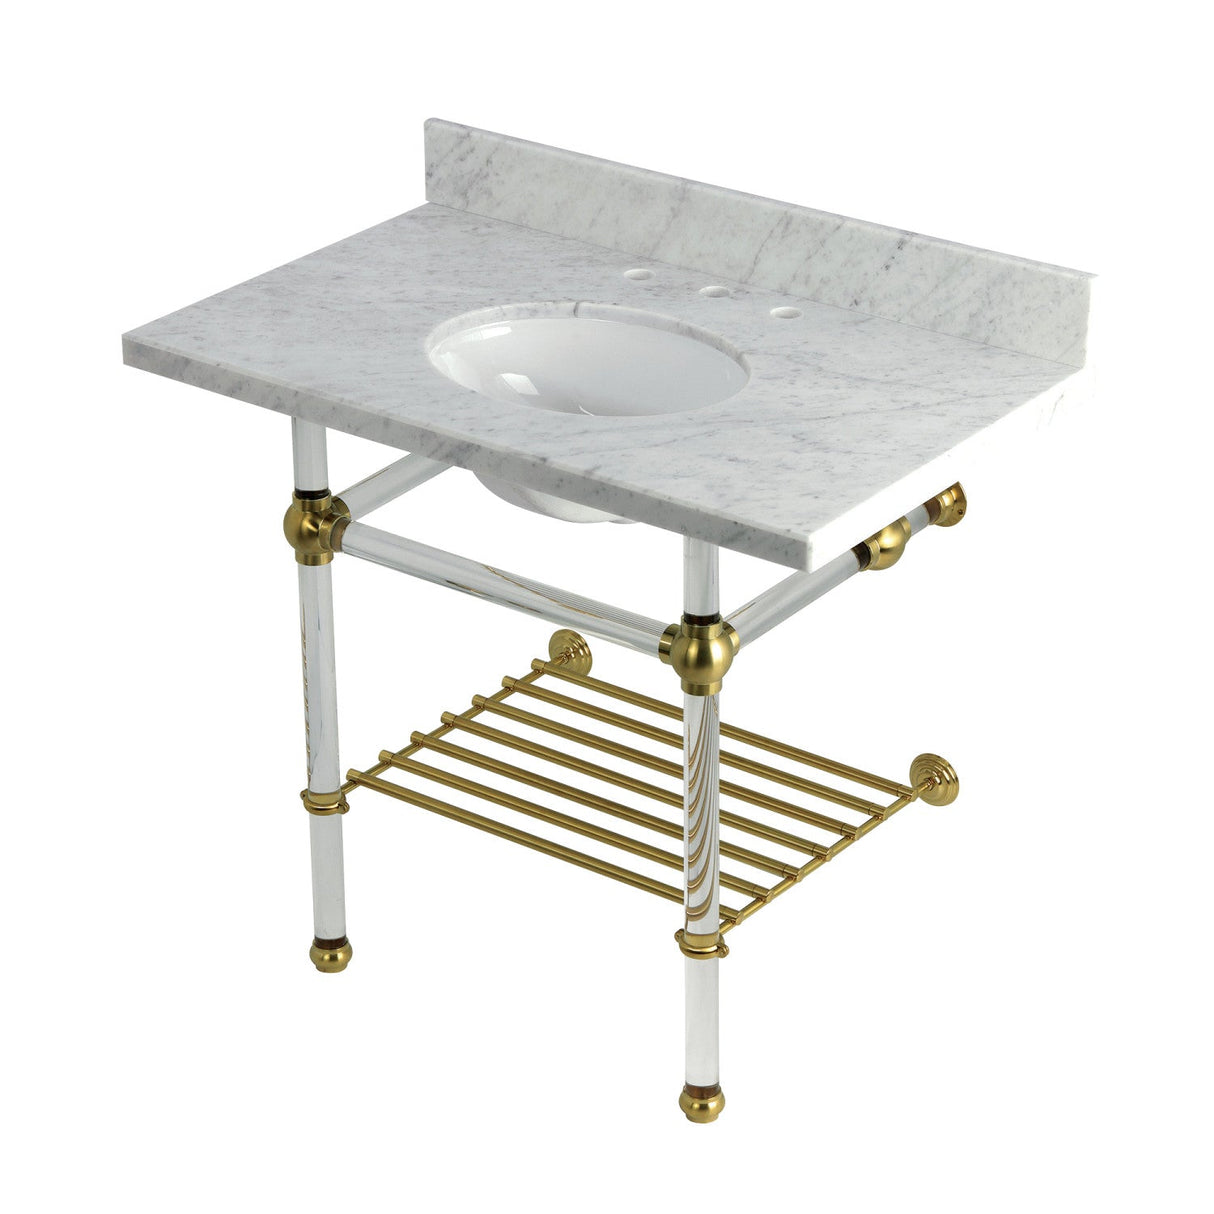 Templeton KVPB3630MAB7 36-Inch Console Sink with Acrylic Legs (8-Inch, 3 Hole), Carrara Marble/Brushed Brass